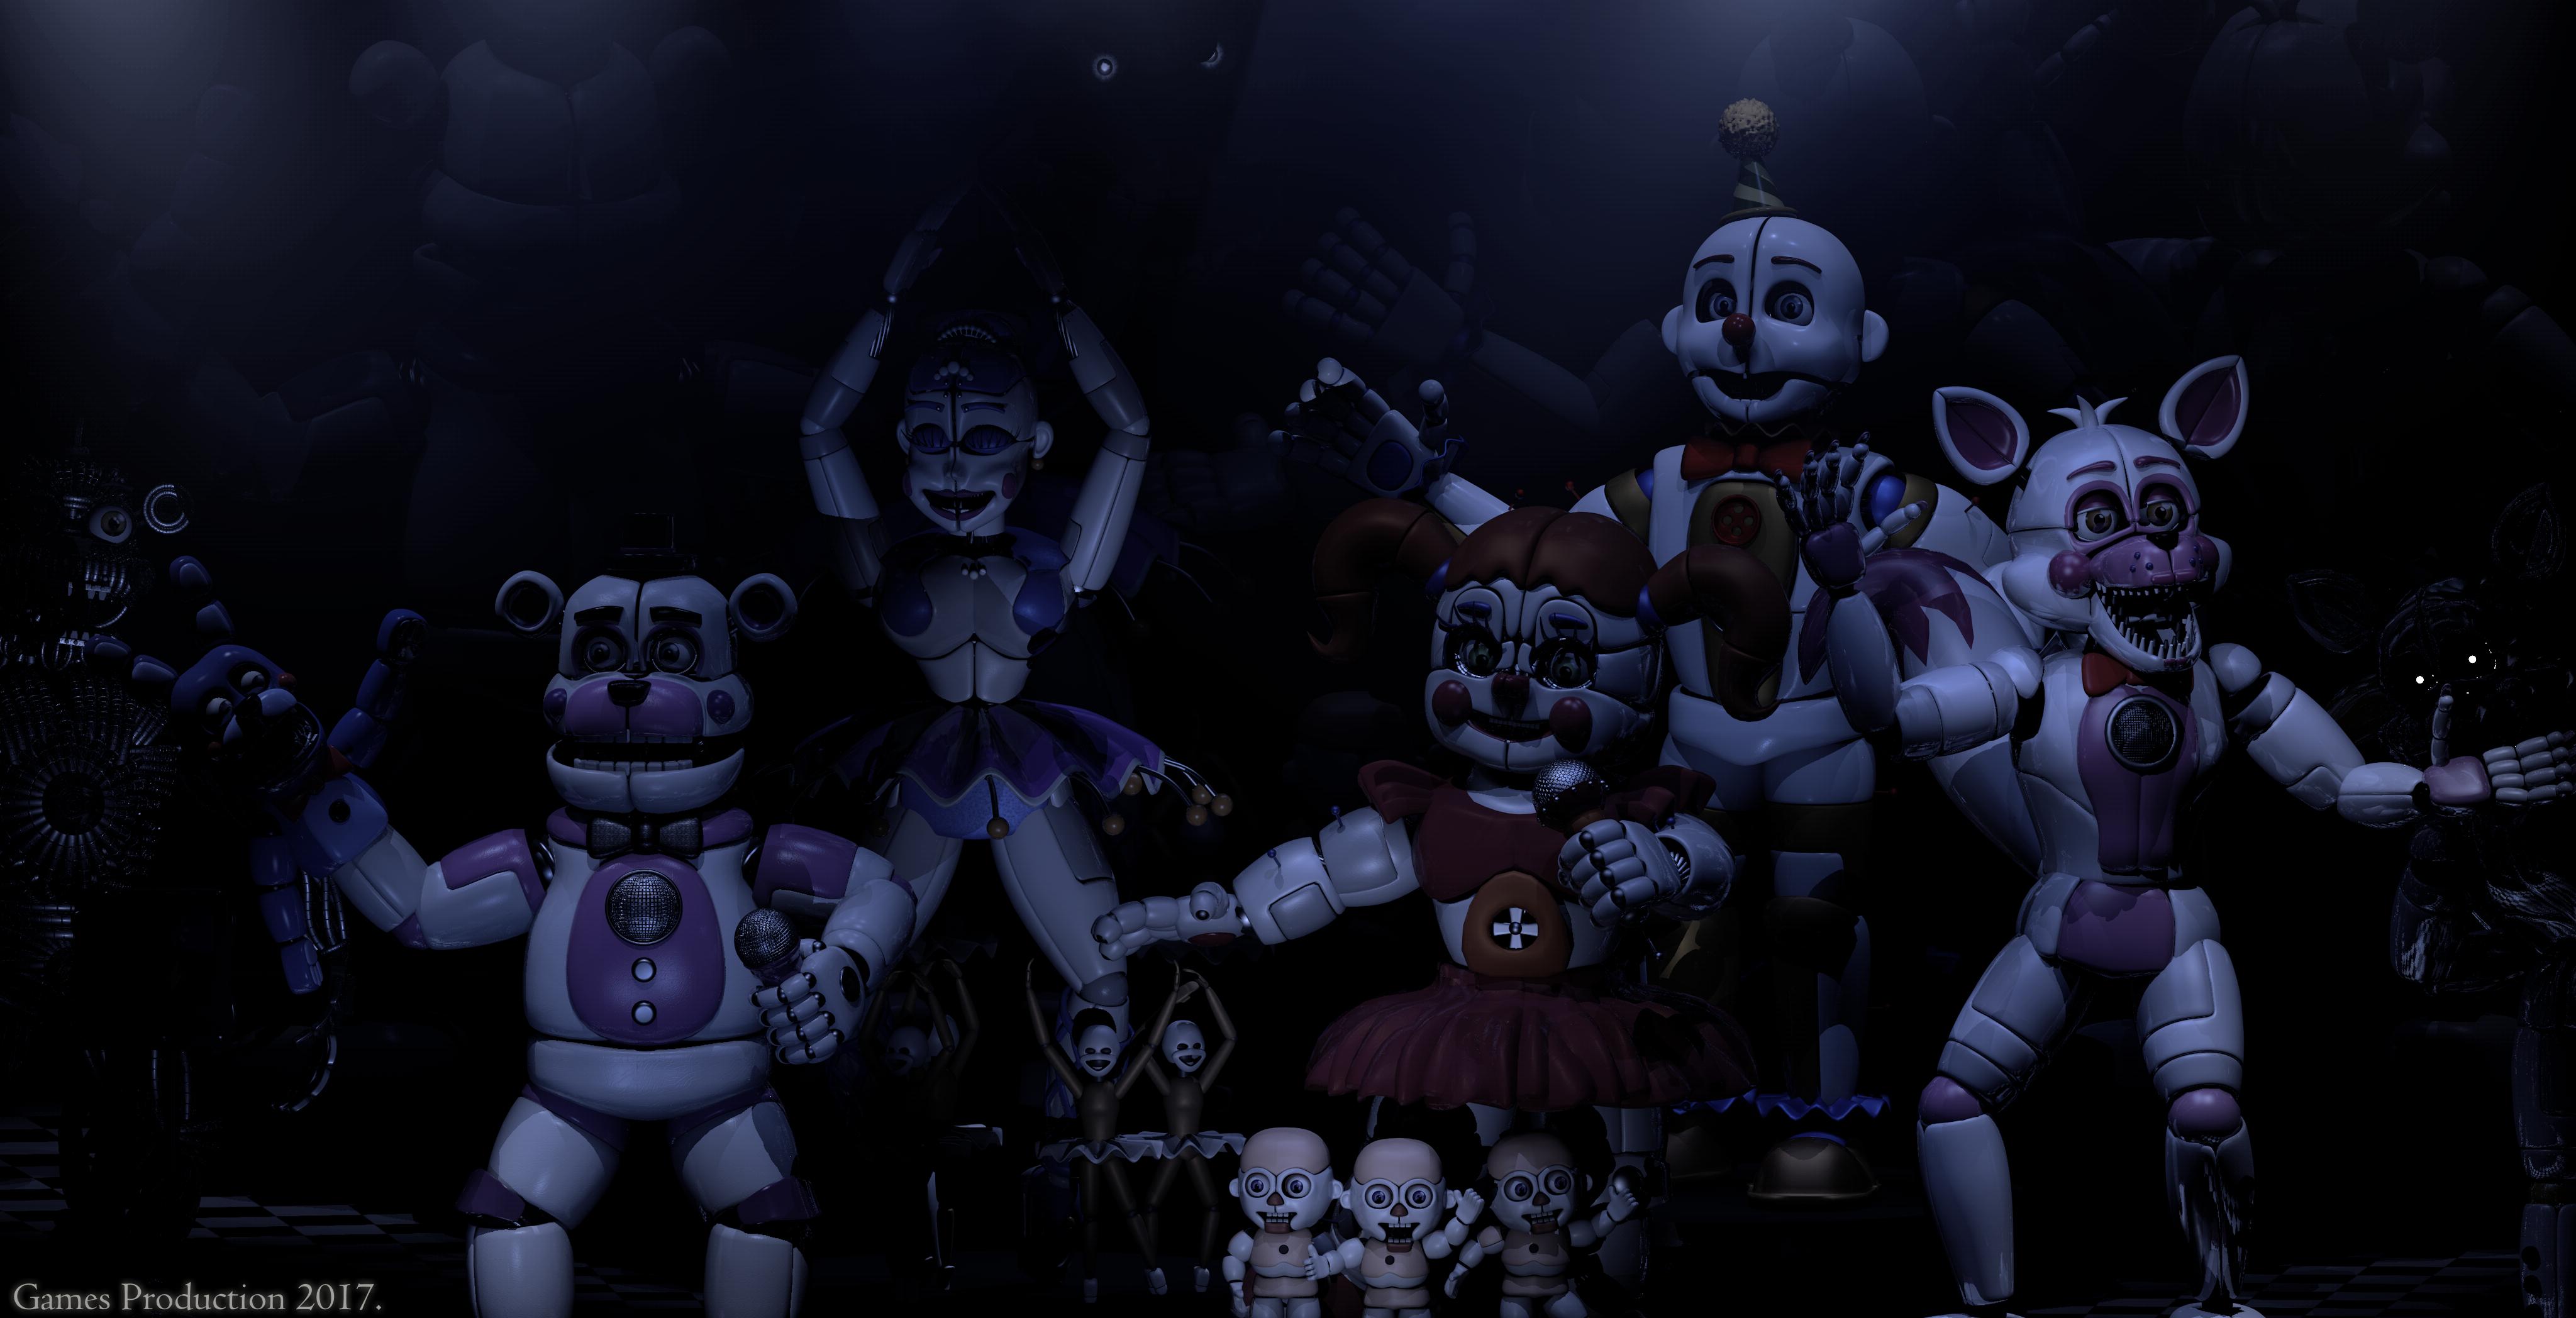 4096 x 2096 · png - The Final Show - FNAF SL Wallpaper. by GamesProduction on DeviantArt